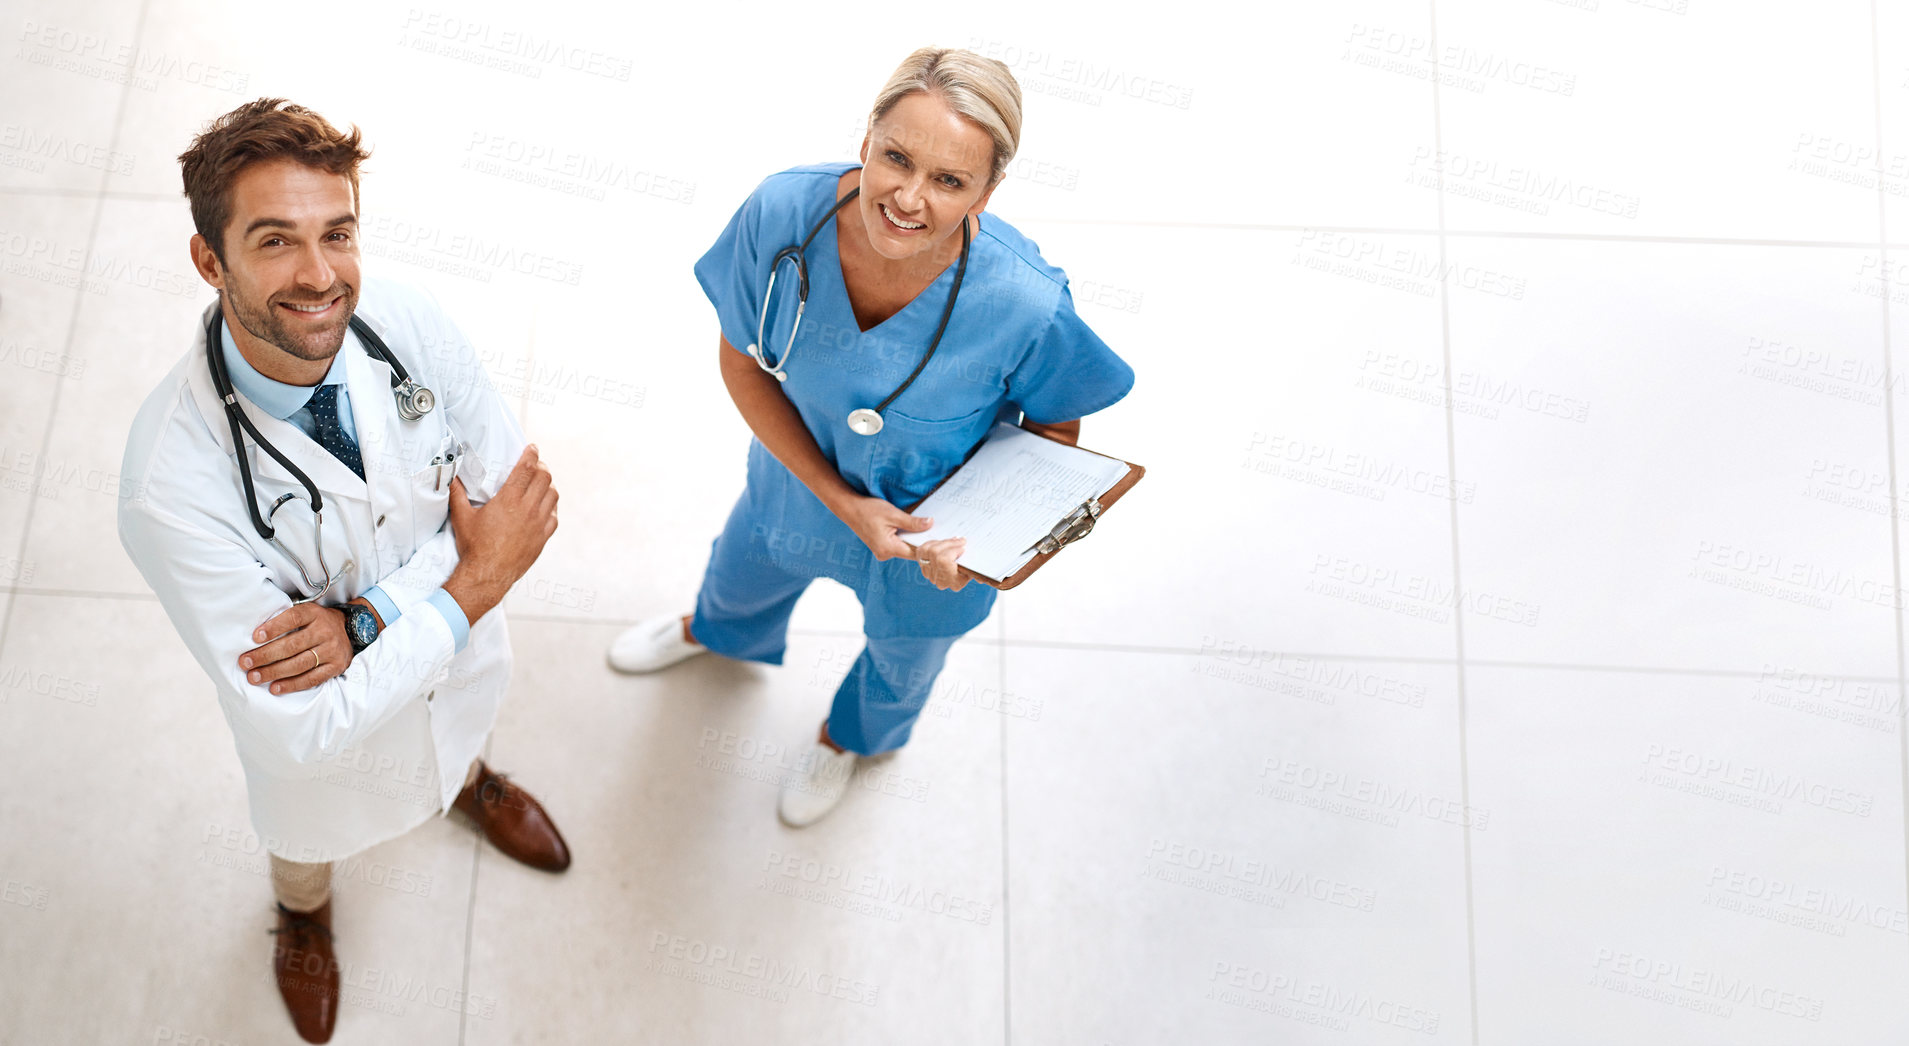 Buy stock photo High angle portrait of two happy healthcare practitioners posing together in a hospital